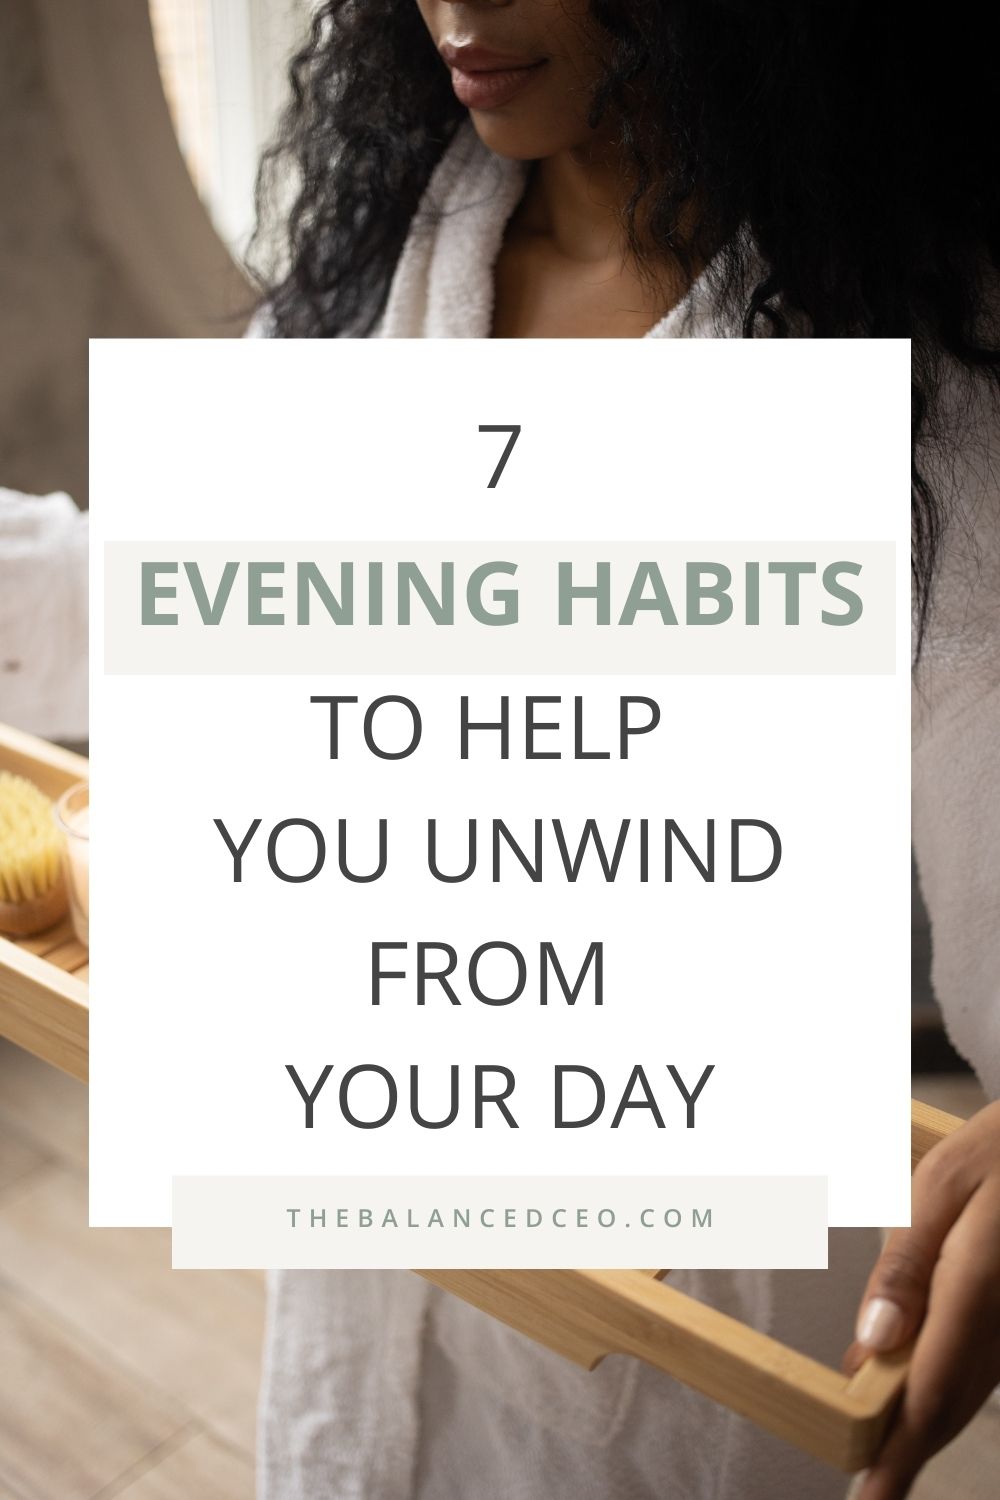 7 Evening Habits to Help You Unwind from Your Day